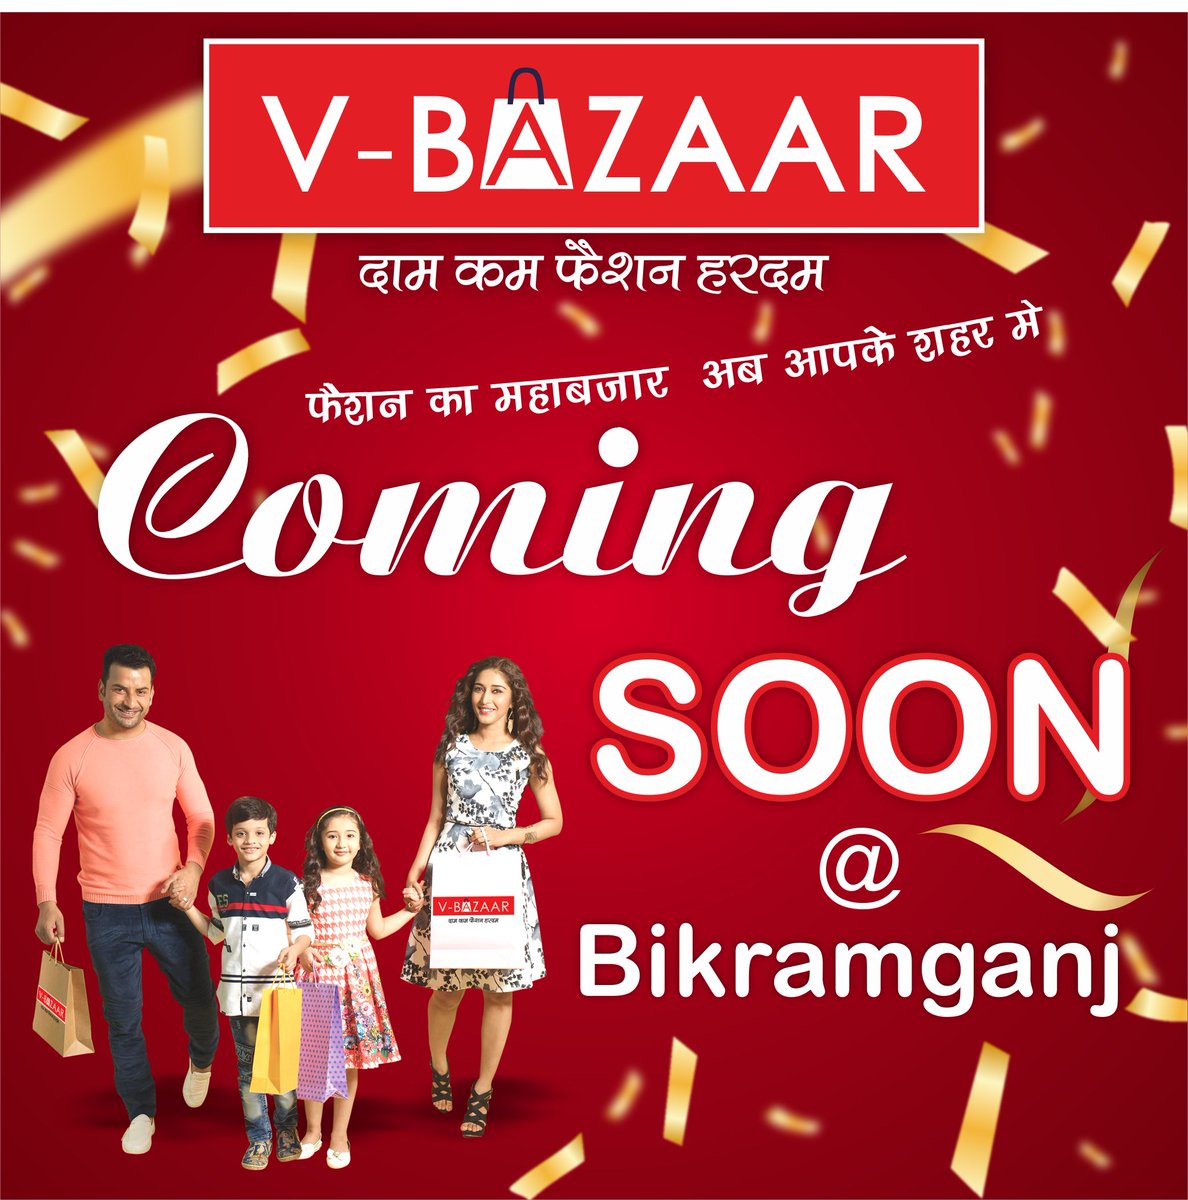 We're thrilled to announce another Grand launch of our new store at Bikramganj, Bihar.
#Vbazaar #NewStore #valueretail #retailers #fastestgrowingretail #comingsoon #grandstoreopening #shopping #fashion #clothing #shoppingadda